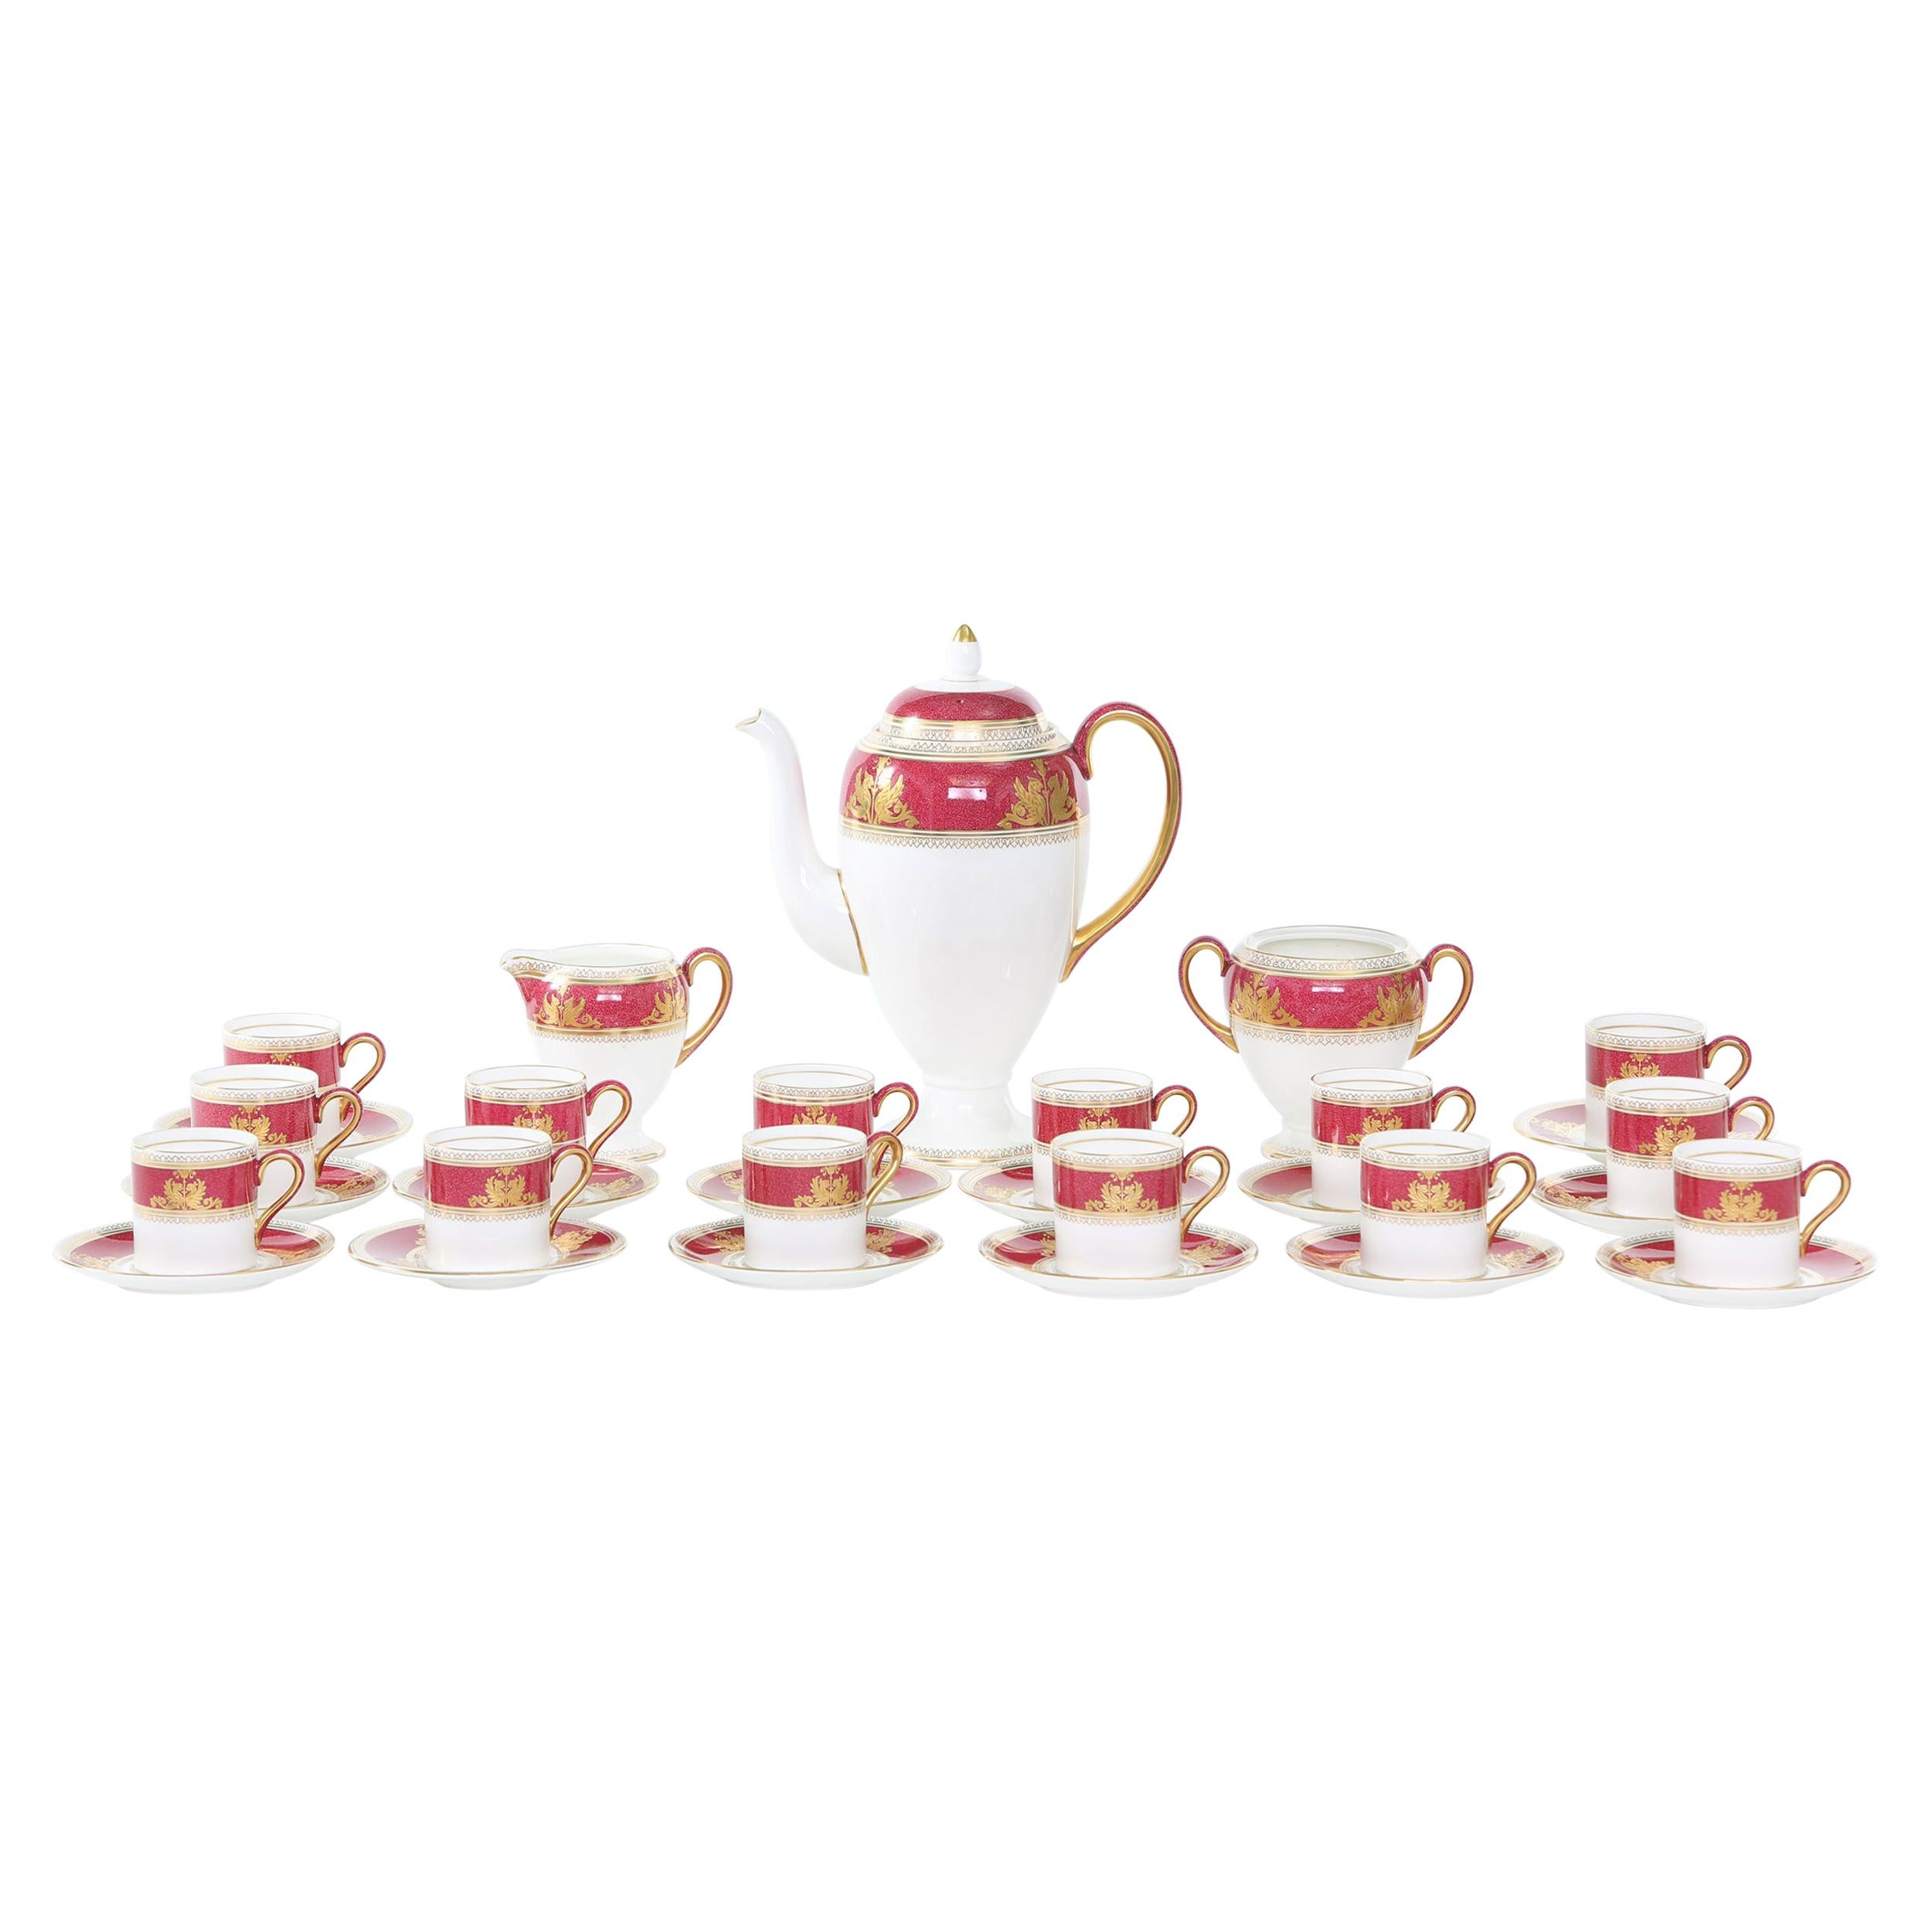 Wedgwood Porcelain Coffee Service for 14 People